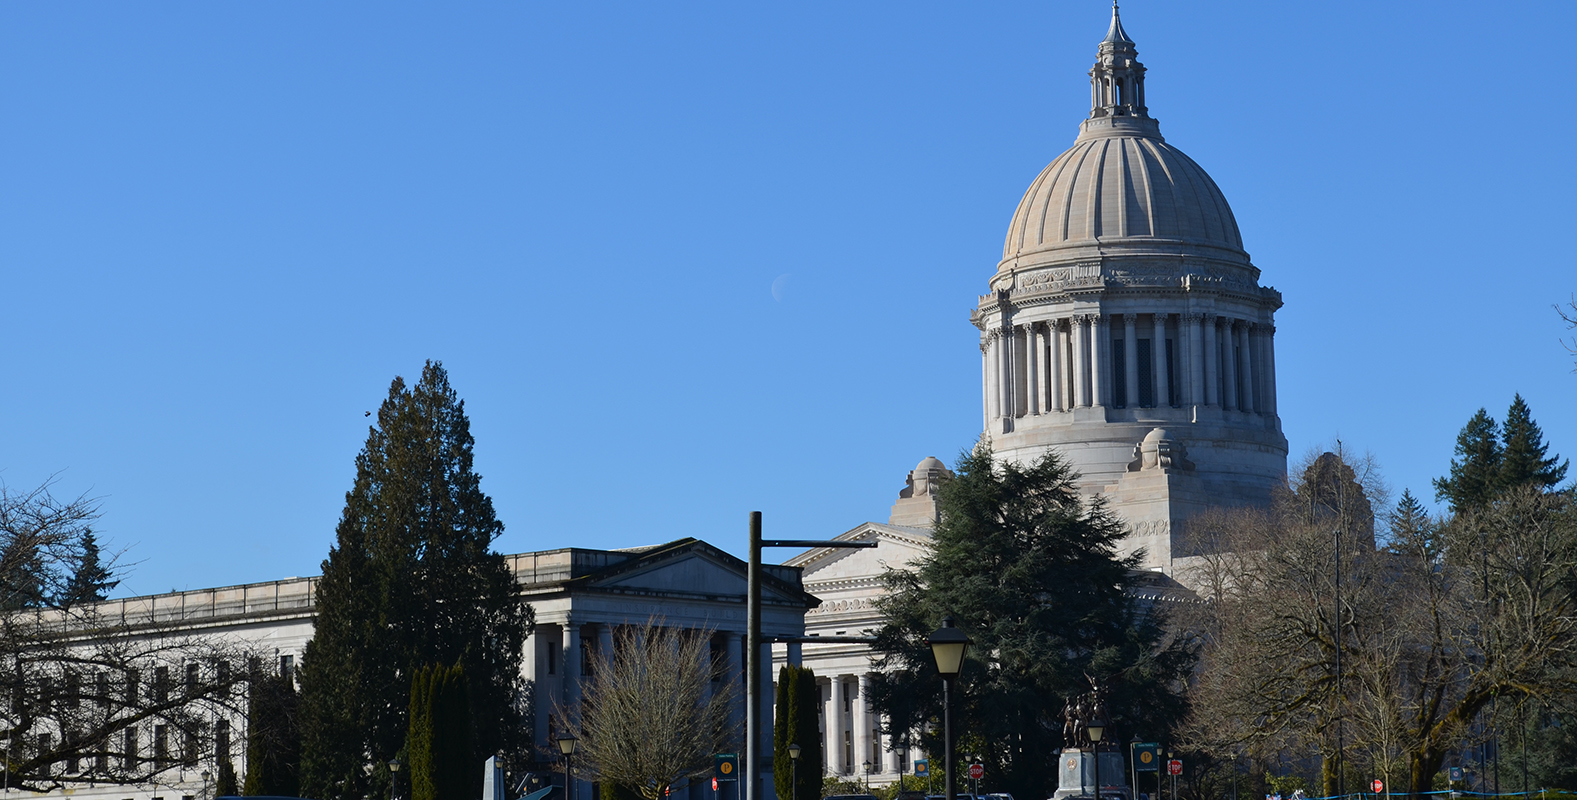 state capitol dome and other buildings with a bright blue winter sky